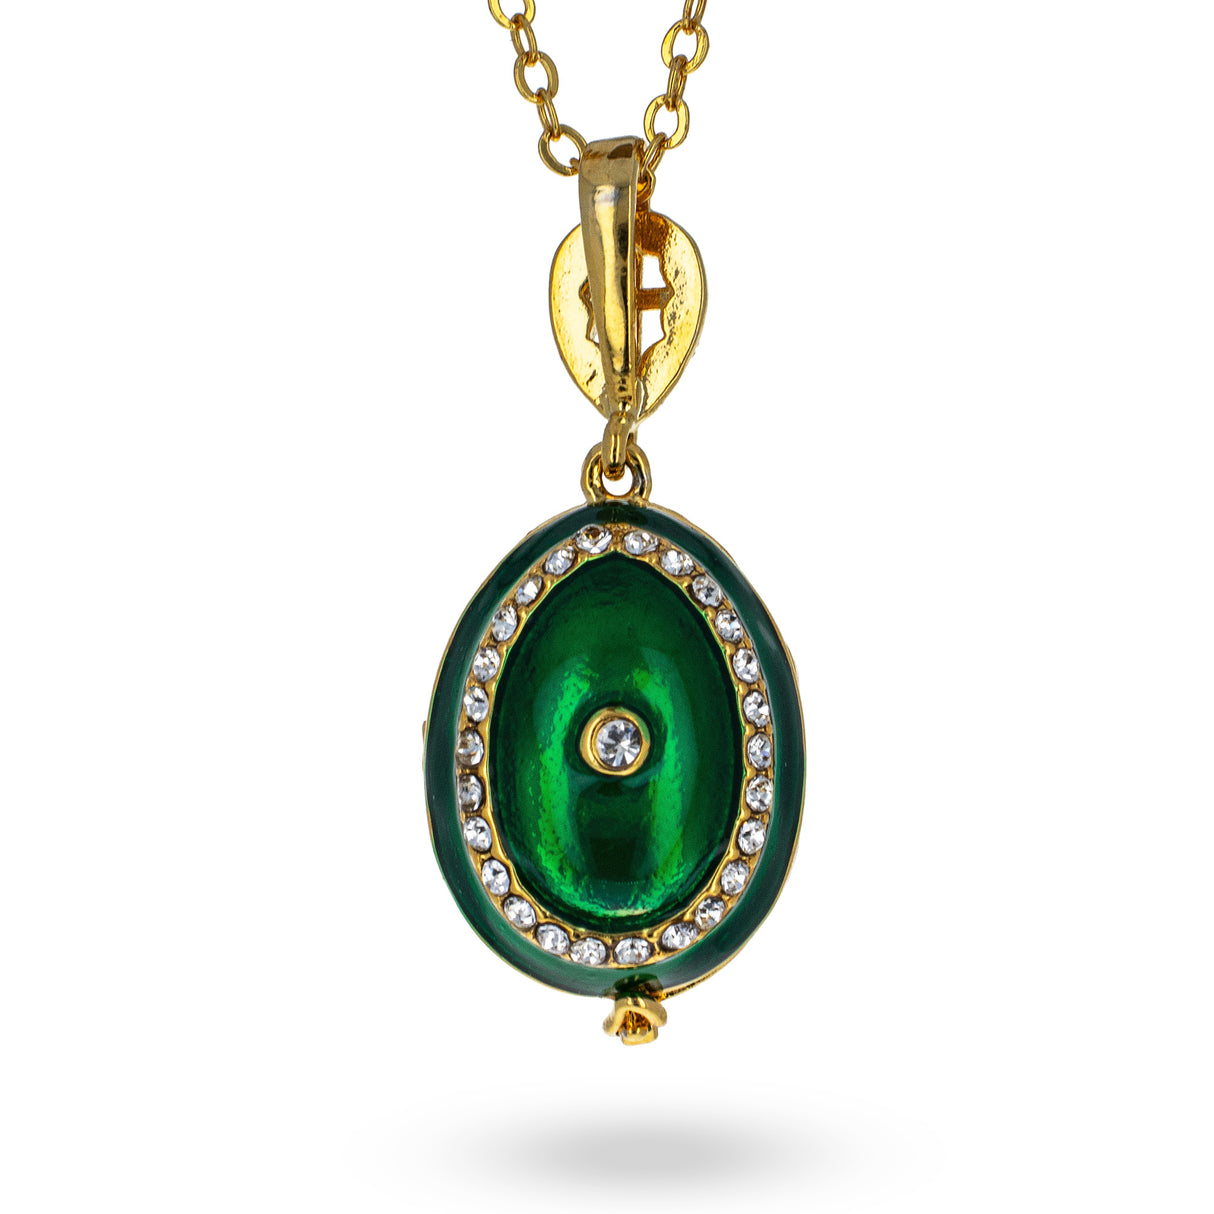 Shop Green Brass 50 Crystals Triptych Icons Royal Egg Pendant Necklace. Buy Green color Pewter Jewelry Necklaces Royal for Sale by Online Gift Shop BestPysanky